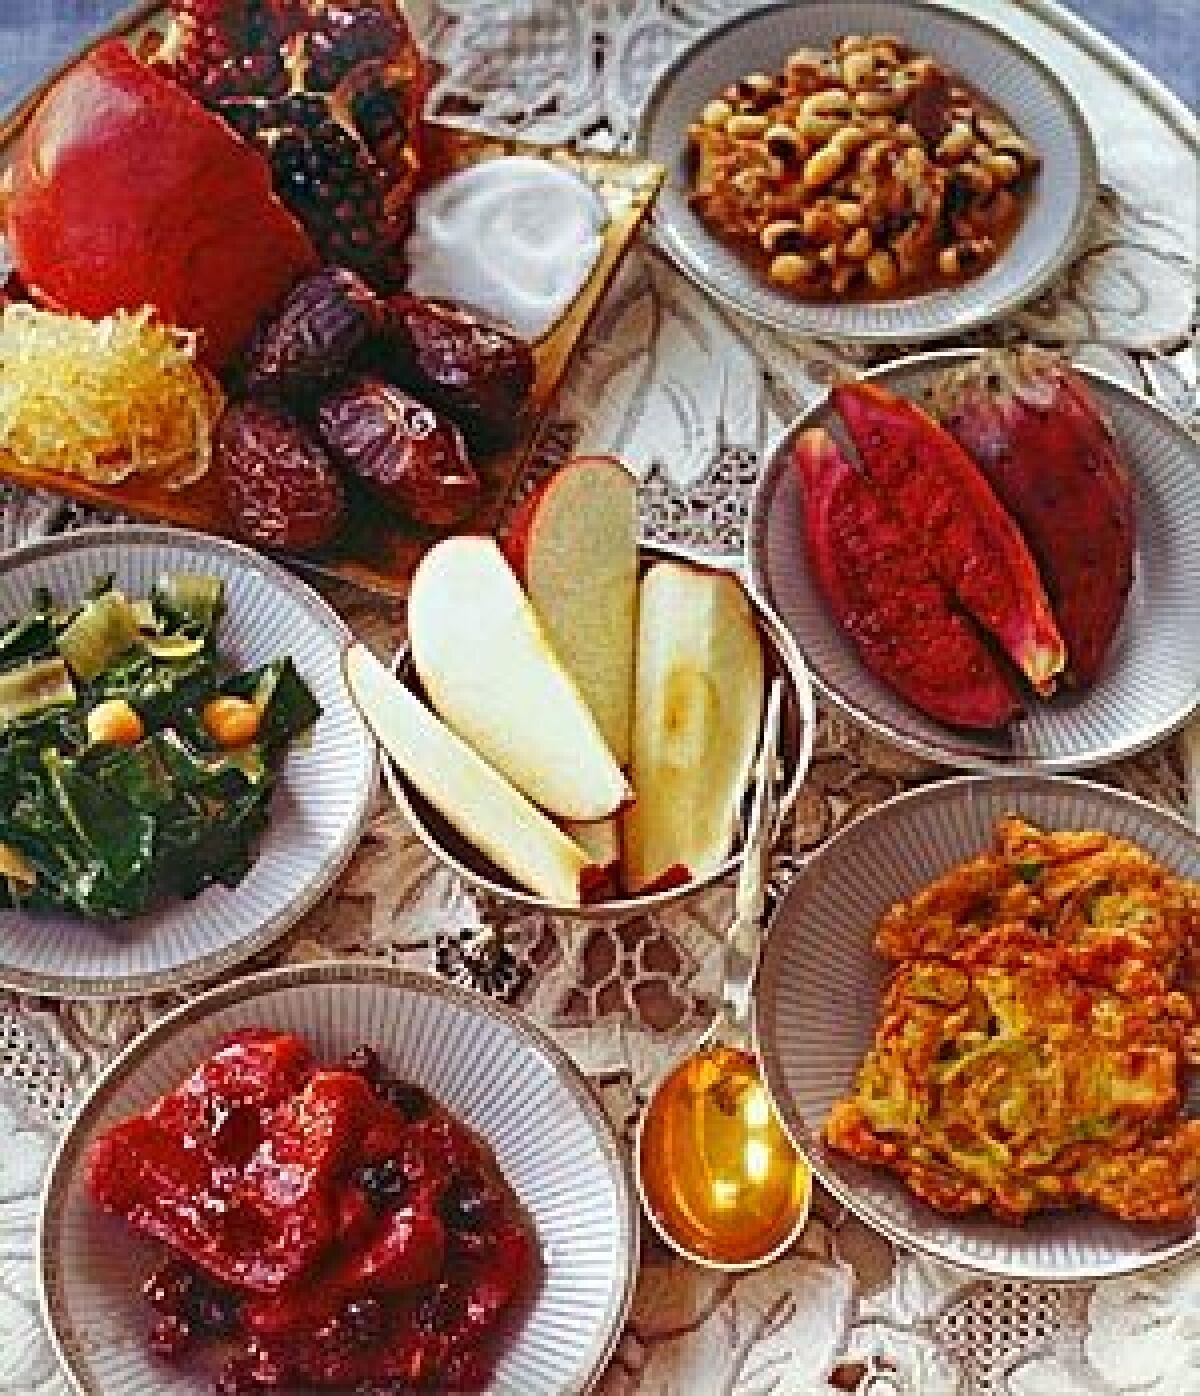 Leek fritters, lower right, are among the symbolic -- and delicious -- delights served on Rosh Hashanah.